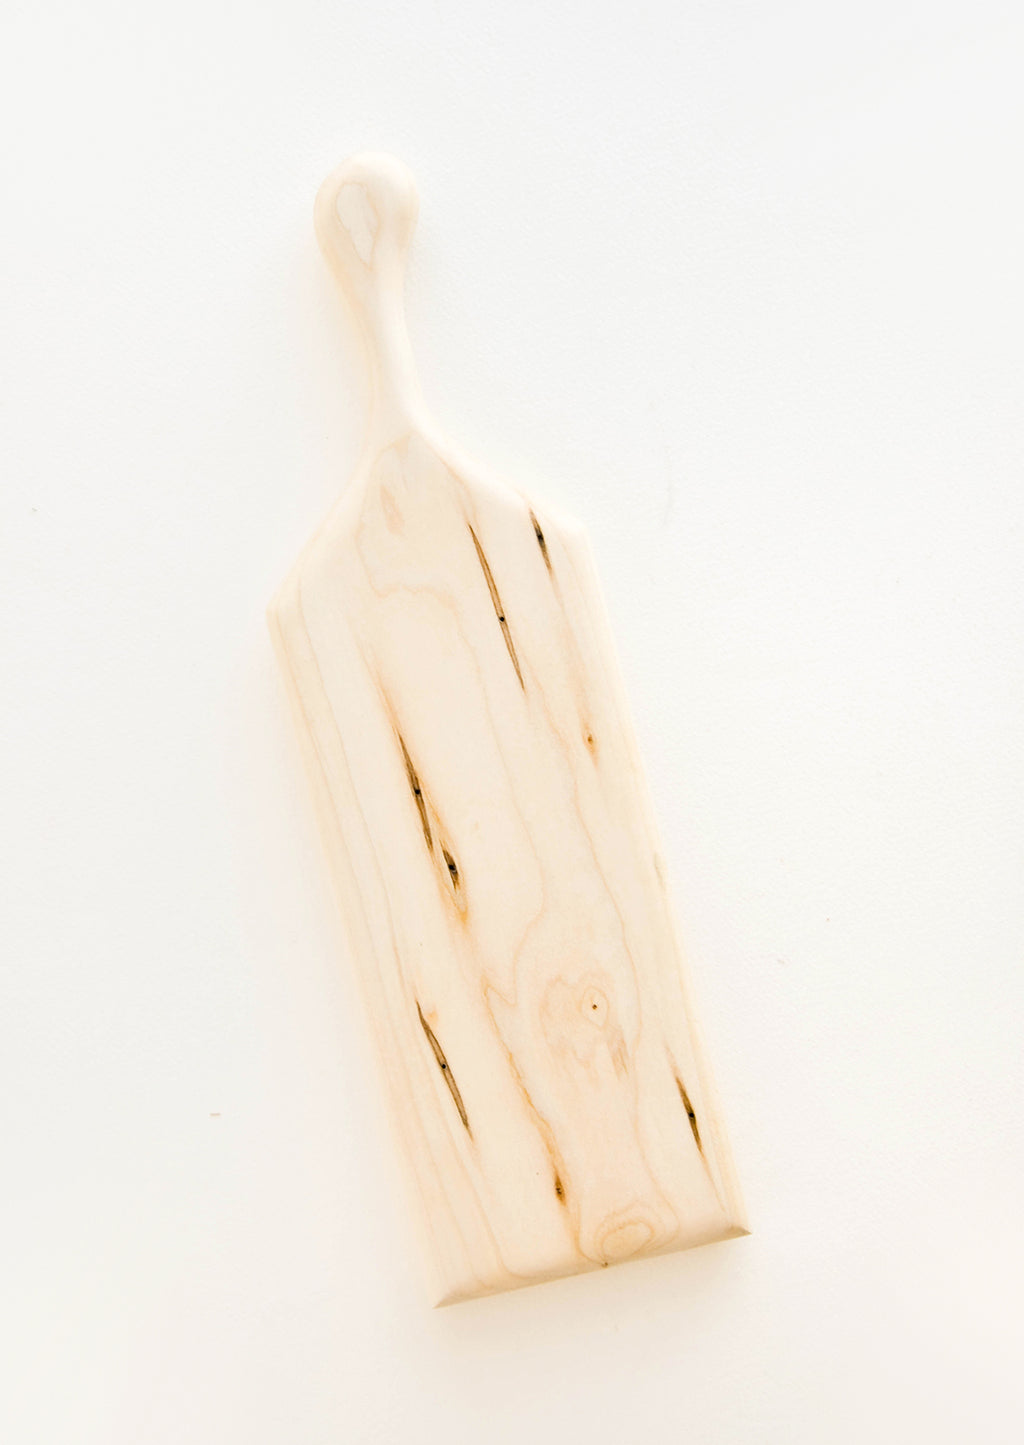 Small: A long rectangular pale wood cutting board with handle.